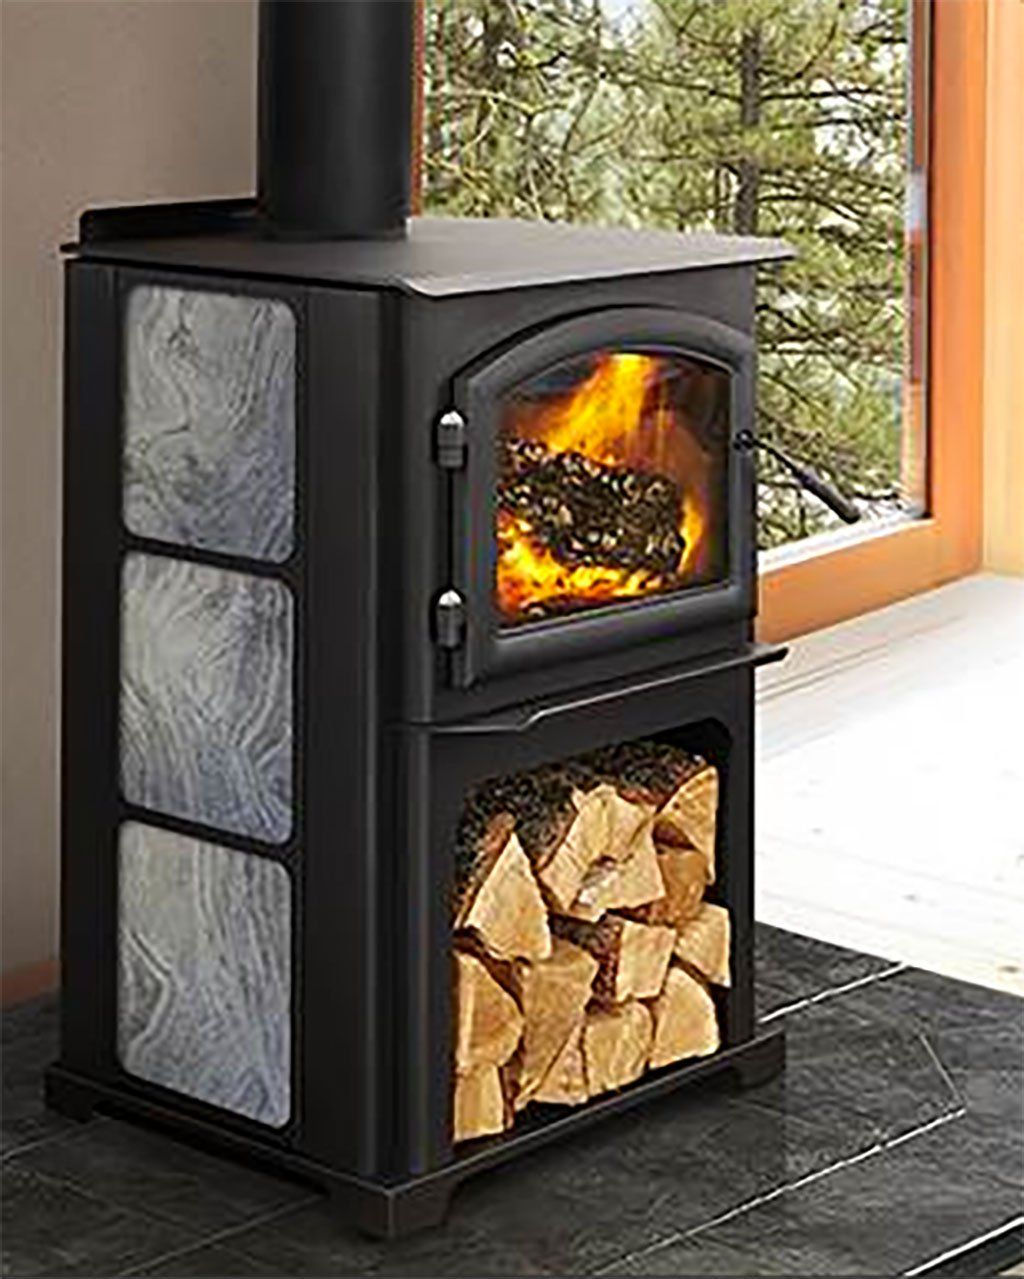 Fireplace Heater System Lovely Quadra Fire 3100 Limited Edition Wood Stove Classic Black